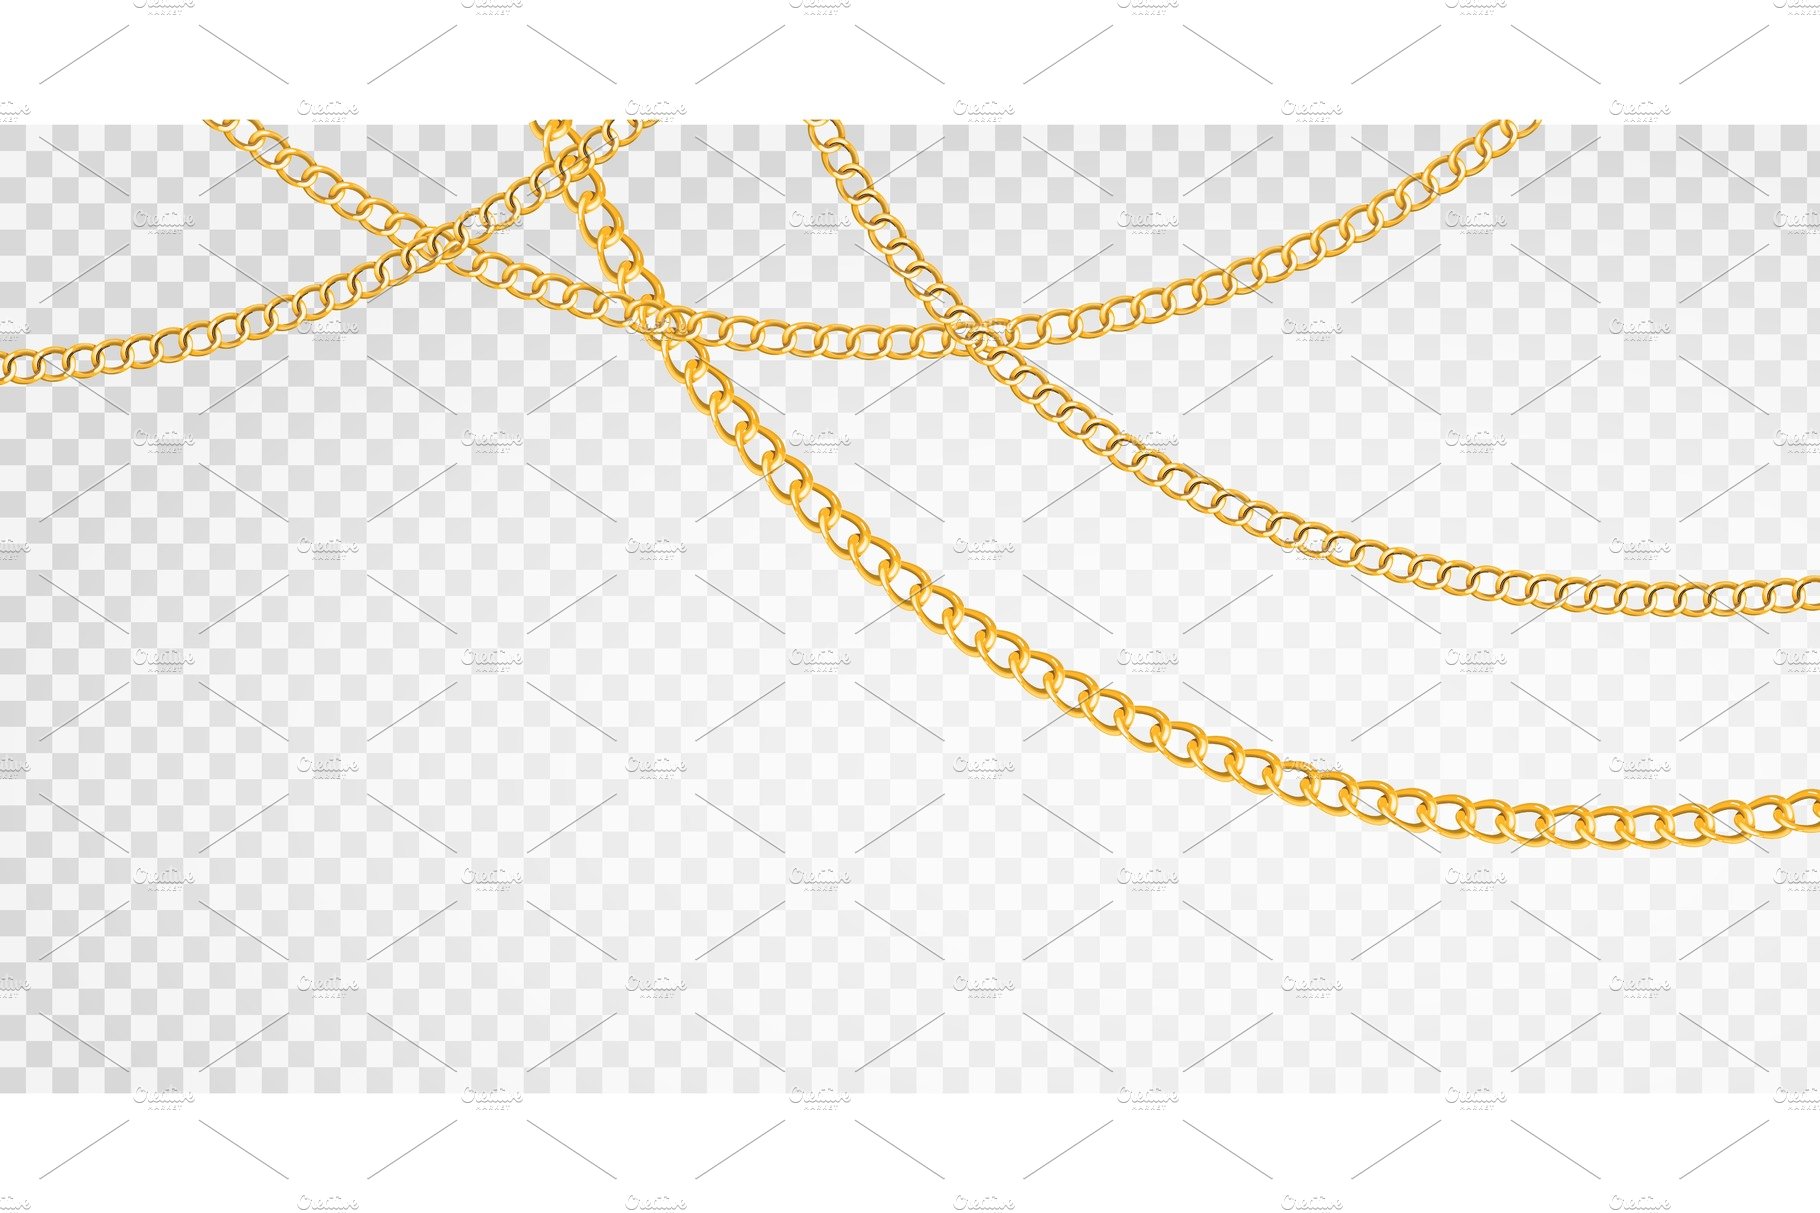 Golden chain. Luxury chains cover image.